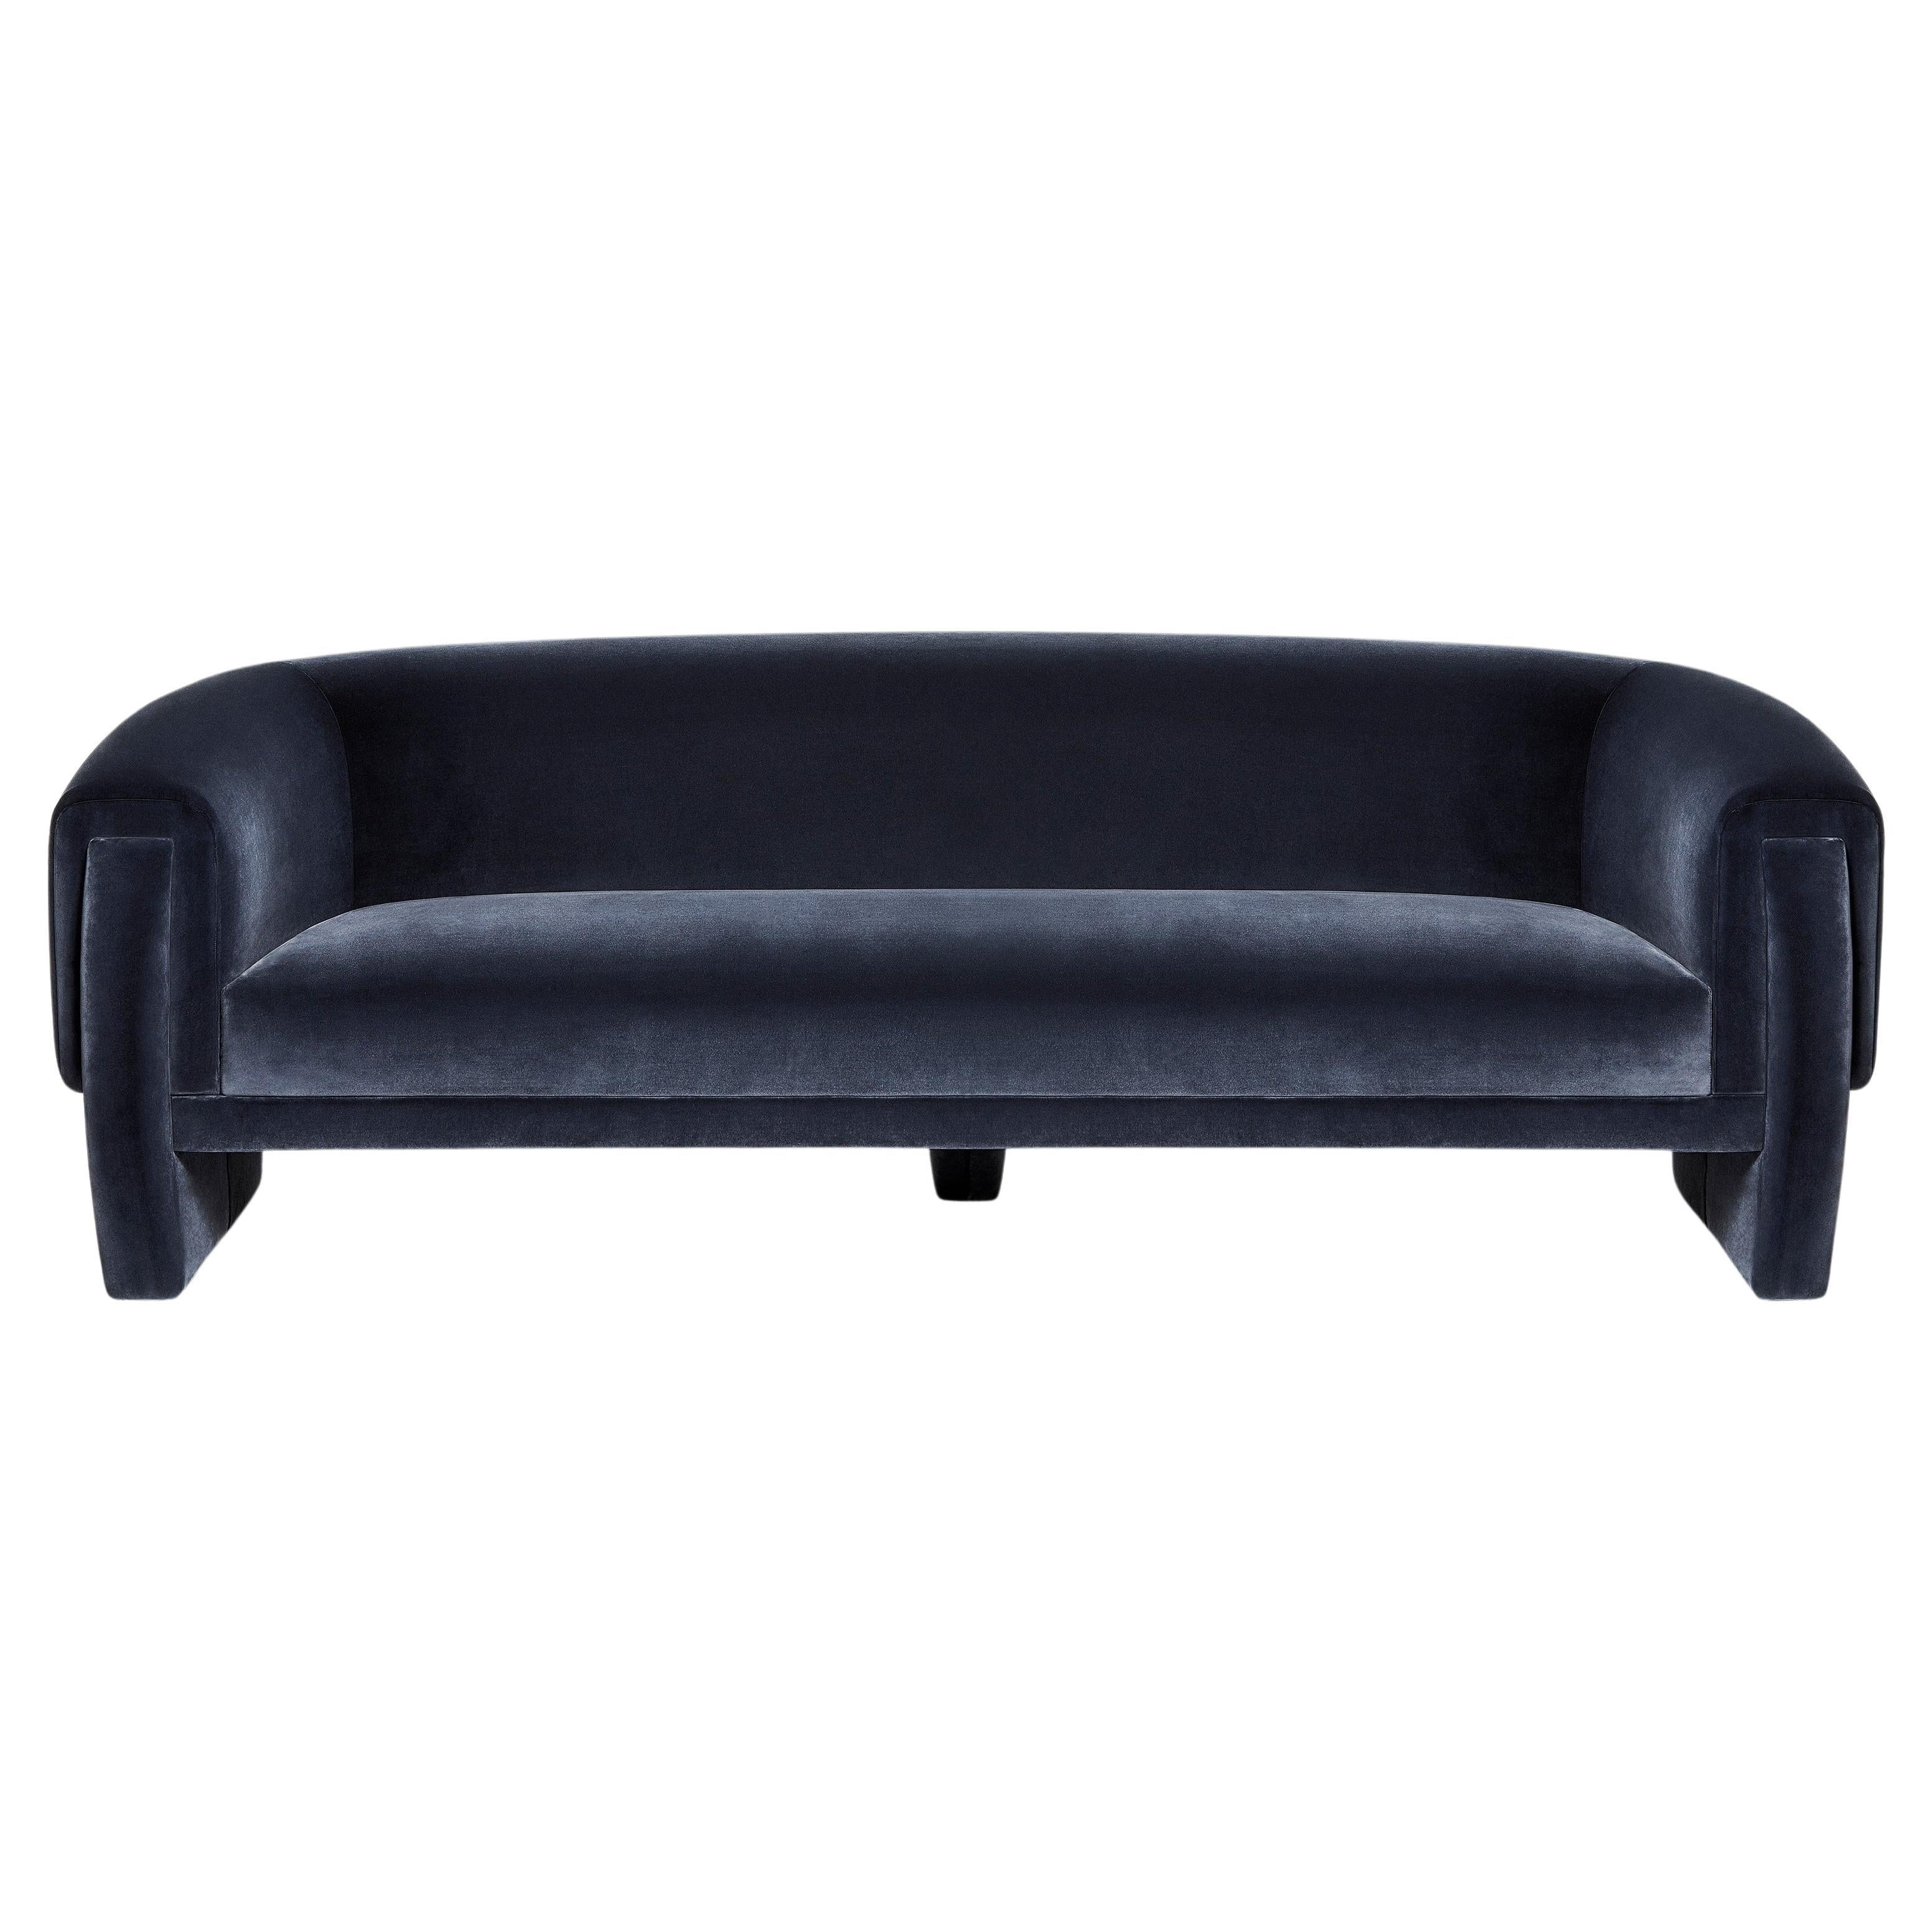 Handcrafted Sofa with Architectural Silhouette and High Resistance Velvet